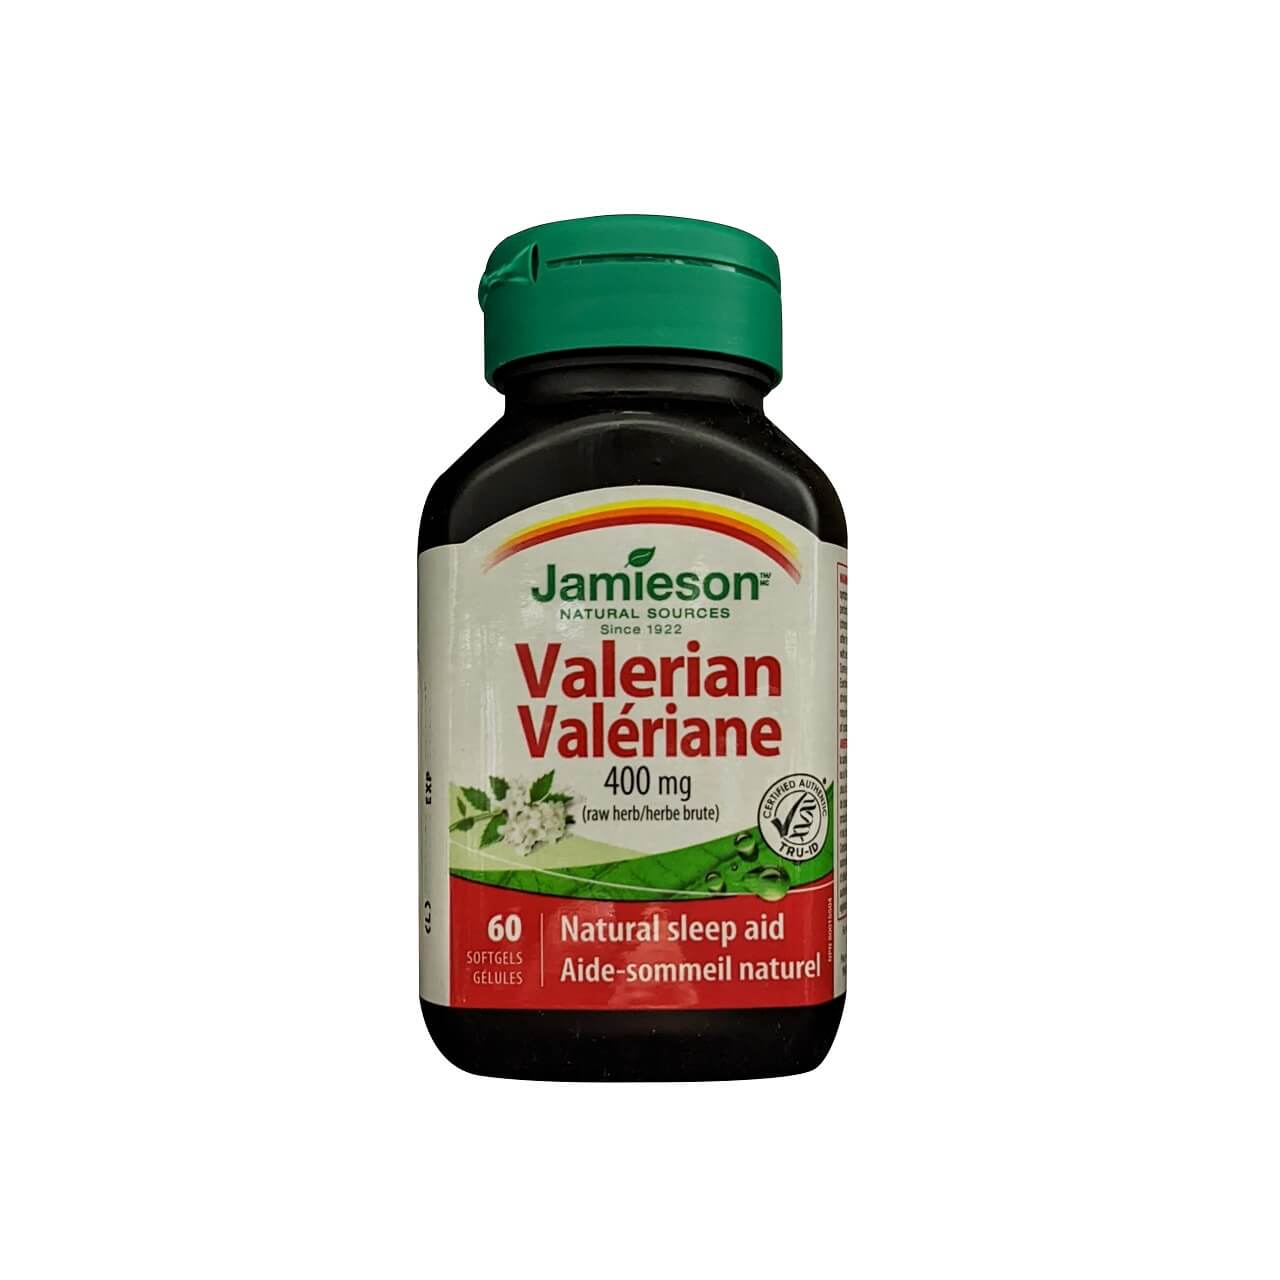 Product label for Jamieson Valerian 400 mg (60 softgels)